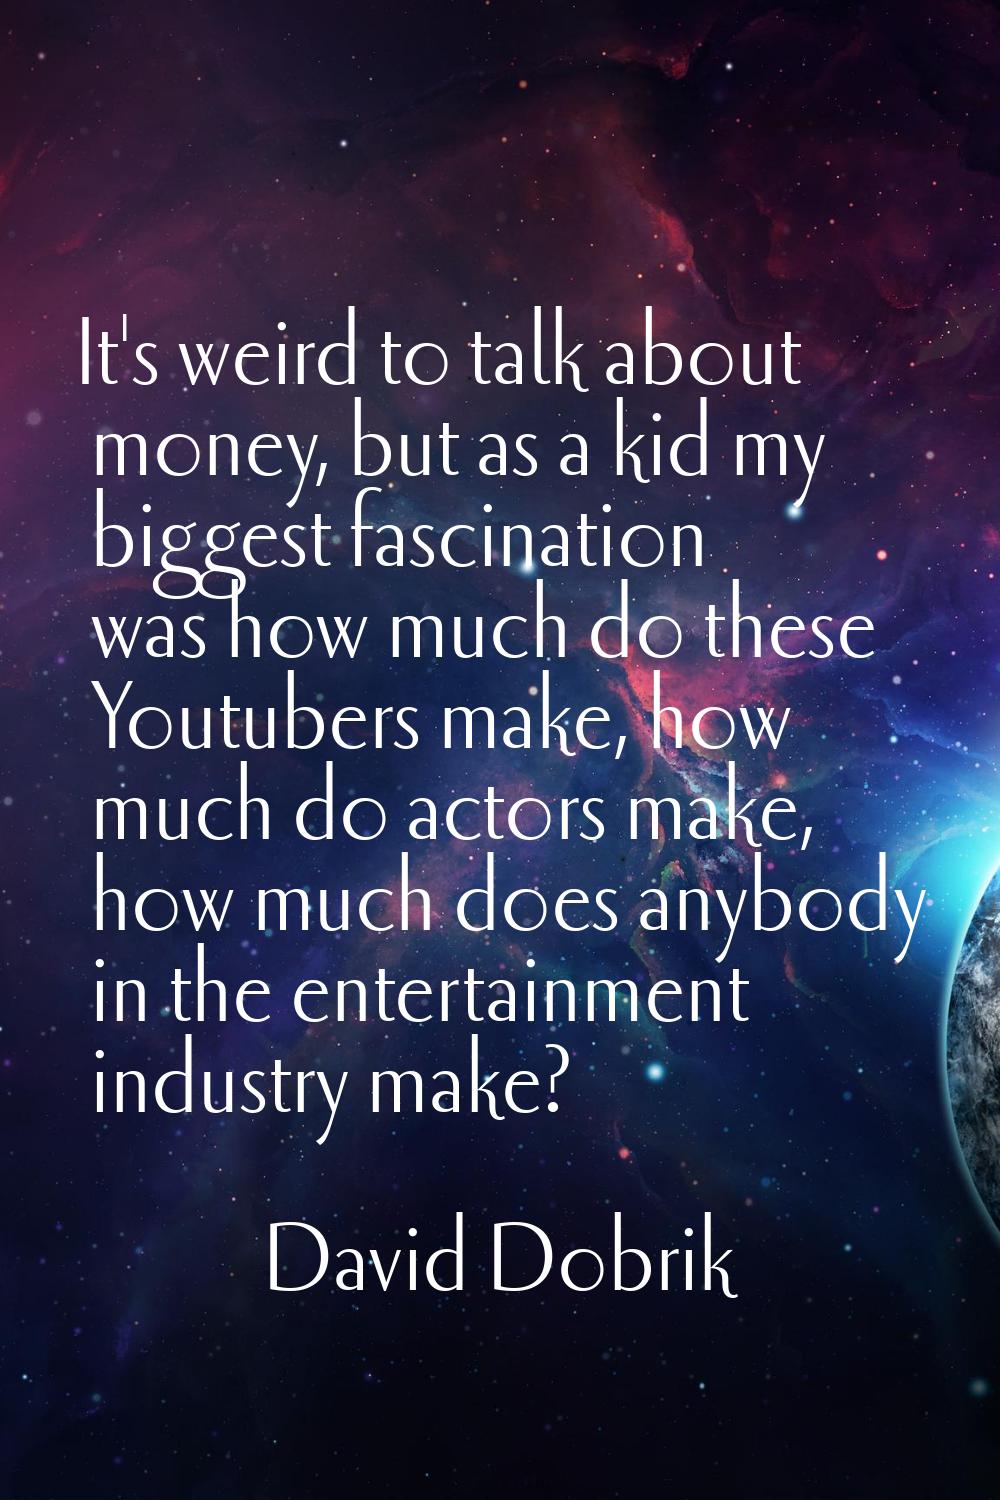 It's weird to talk about money, but as a kid my biggest fascination was how much do these Youtubers